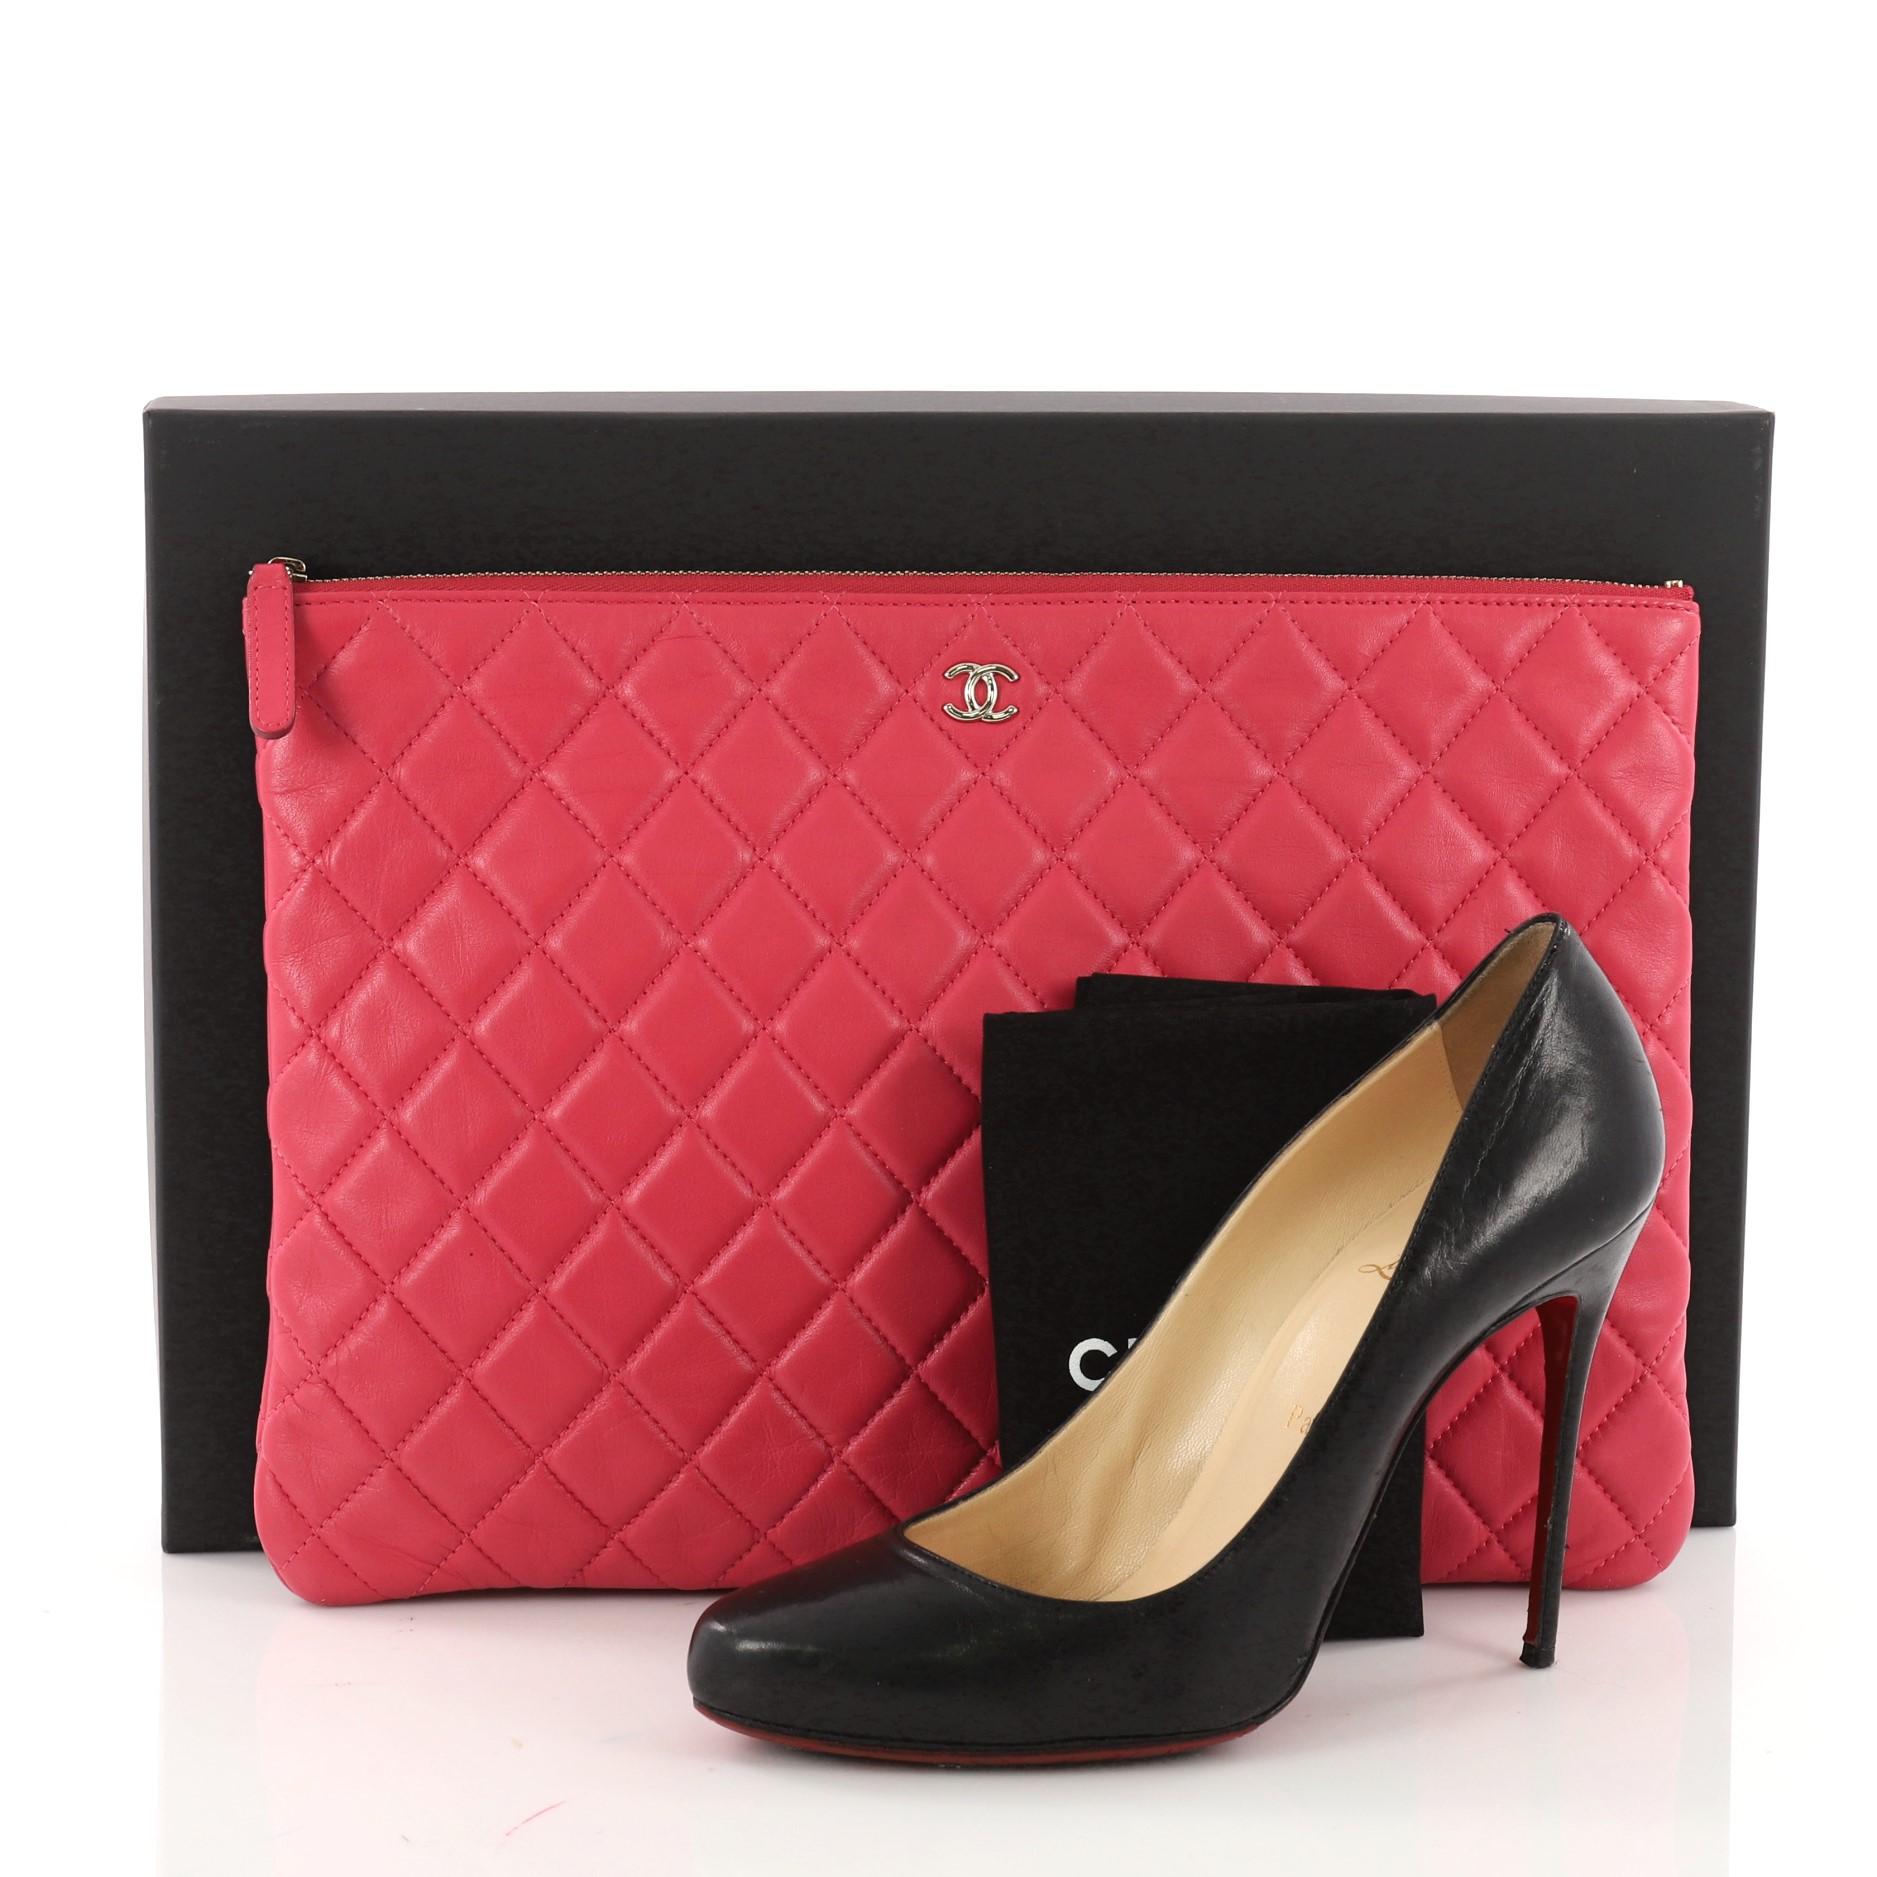 This authentic Chanel O Case Clutch Quilted Lambskin Large adds a touch of elegance to your everyday outfits. Crafted from pink quilted lambskin, this chic clutch features a tiny CC logo on the front and gold-tone hardware accents. Its zip closure